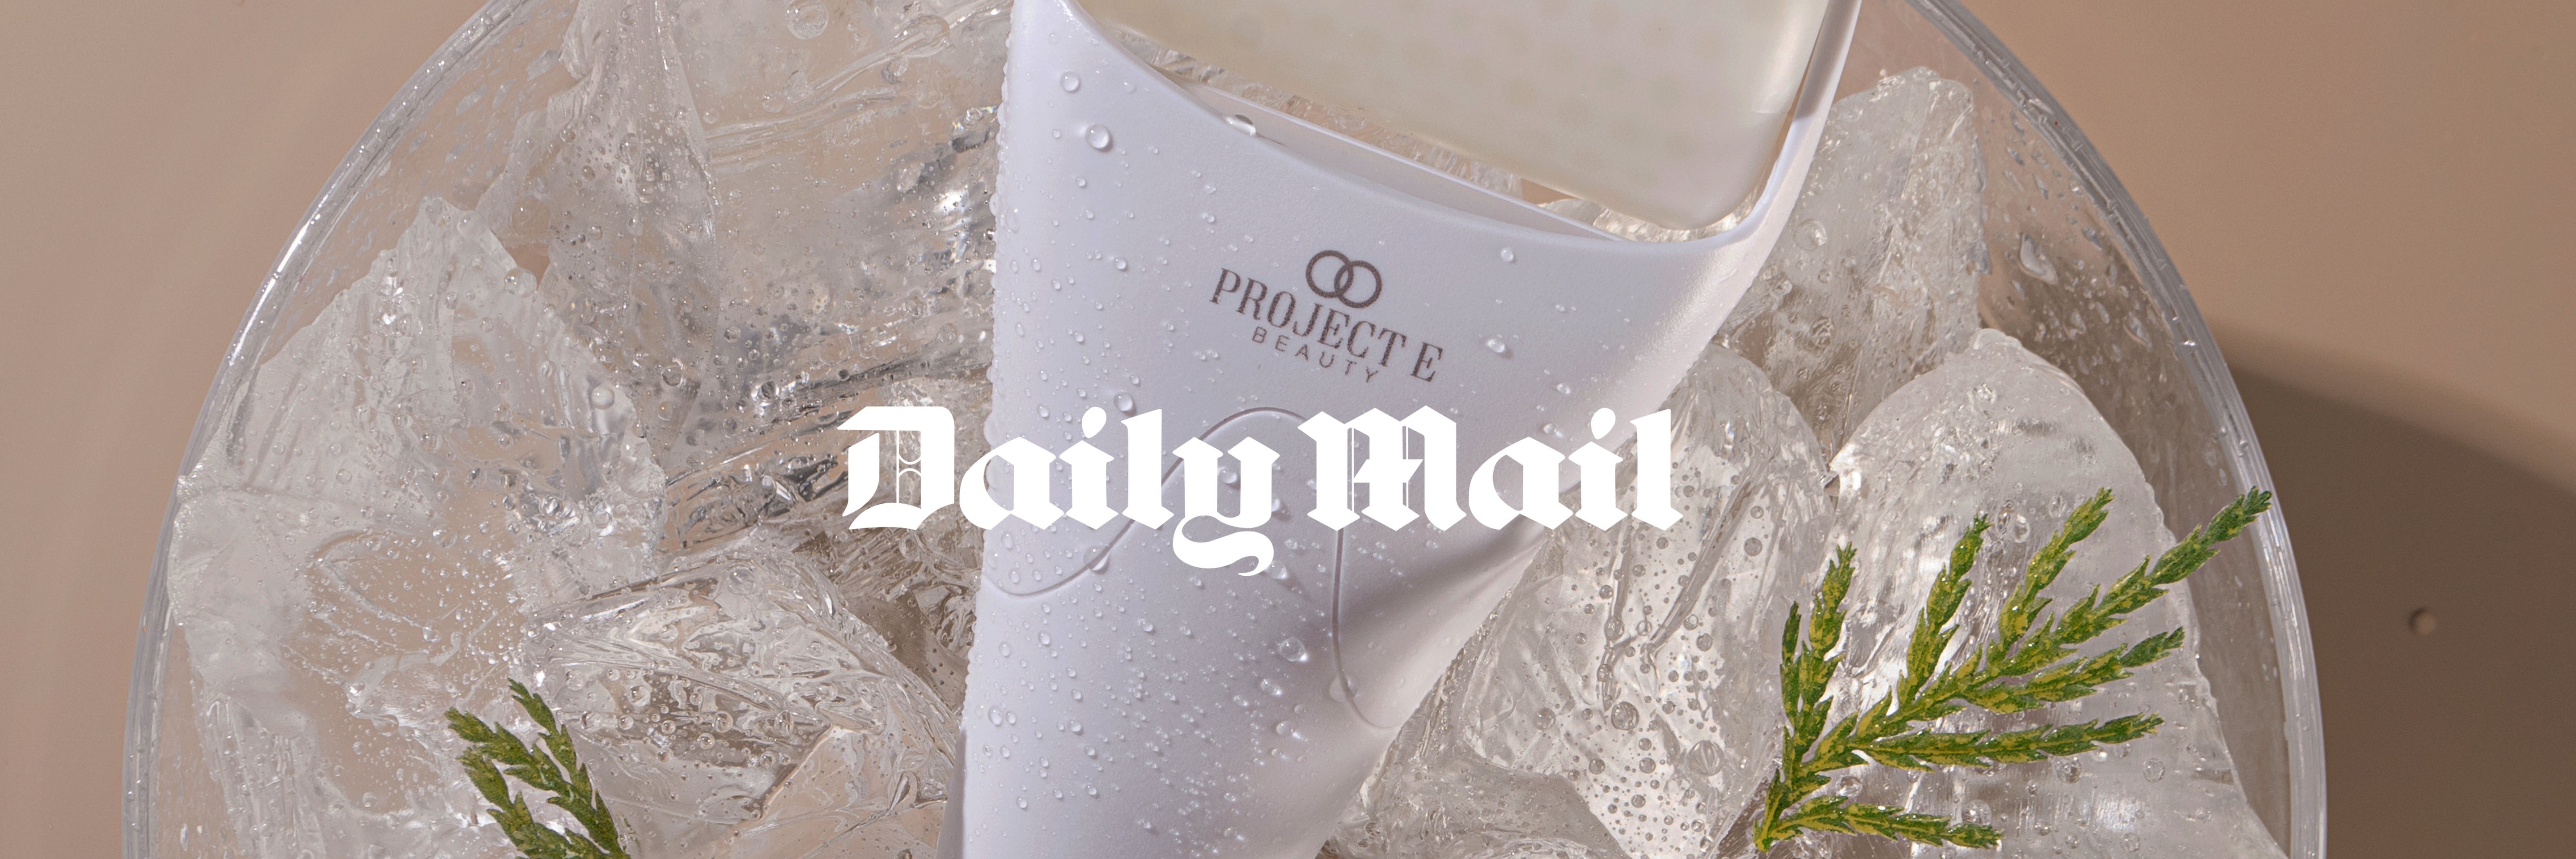 DAILY MAIL TESTS THE ICE ROLLER